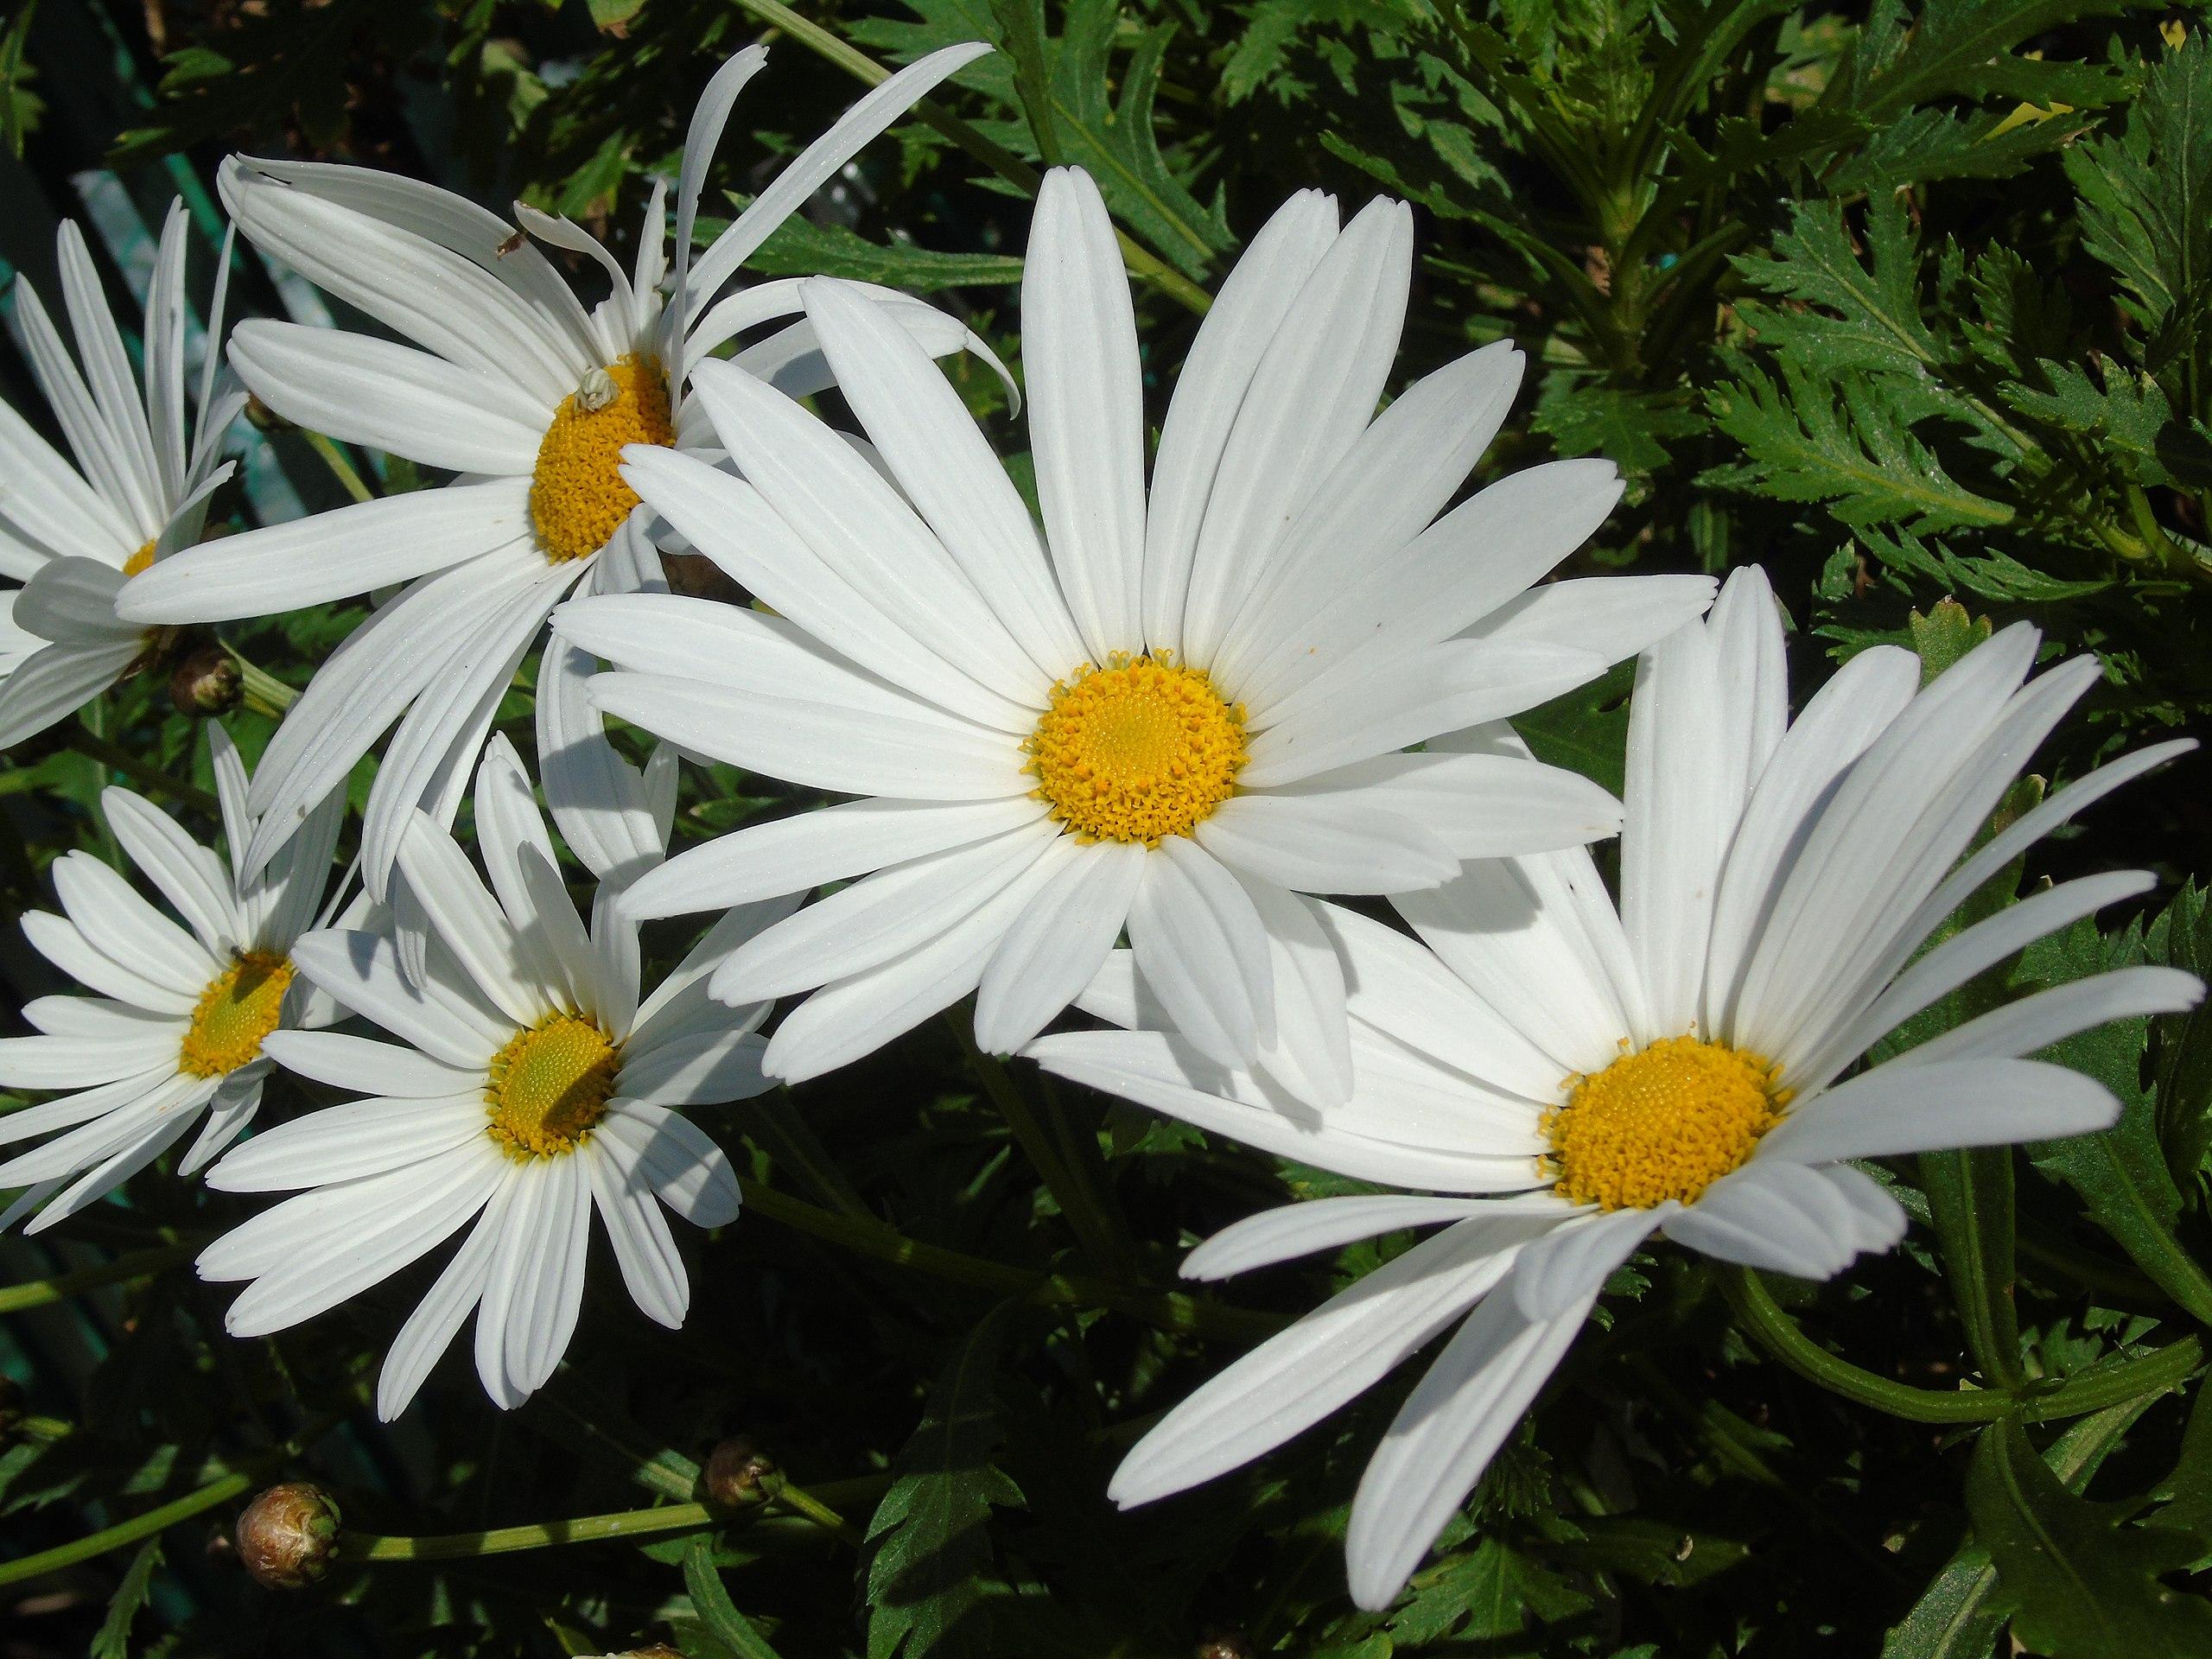 White flowers with yellow center, dark-green leaves and stems.